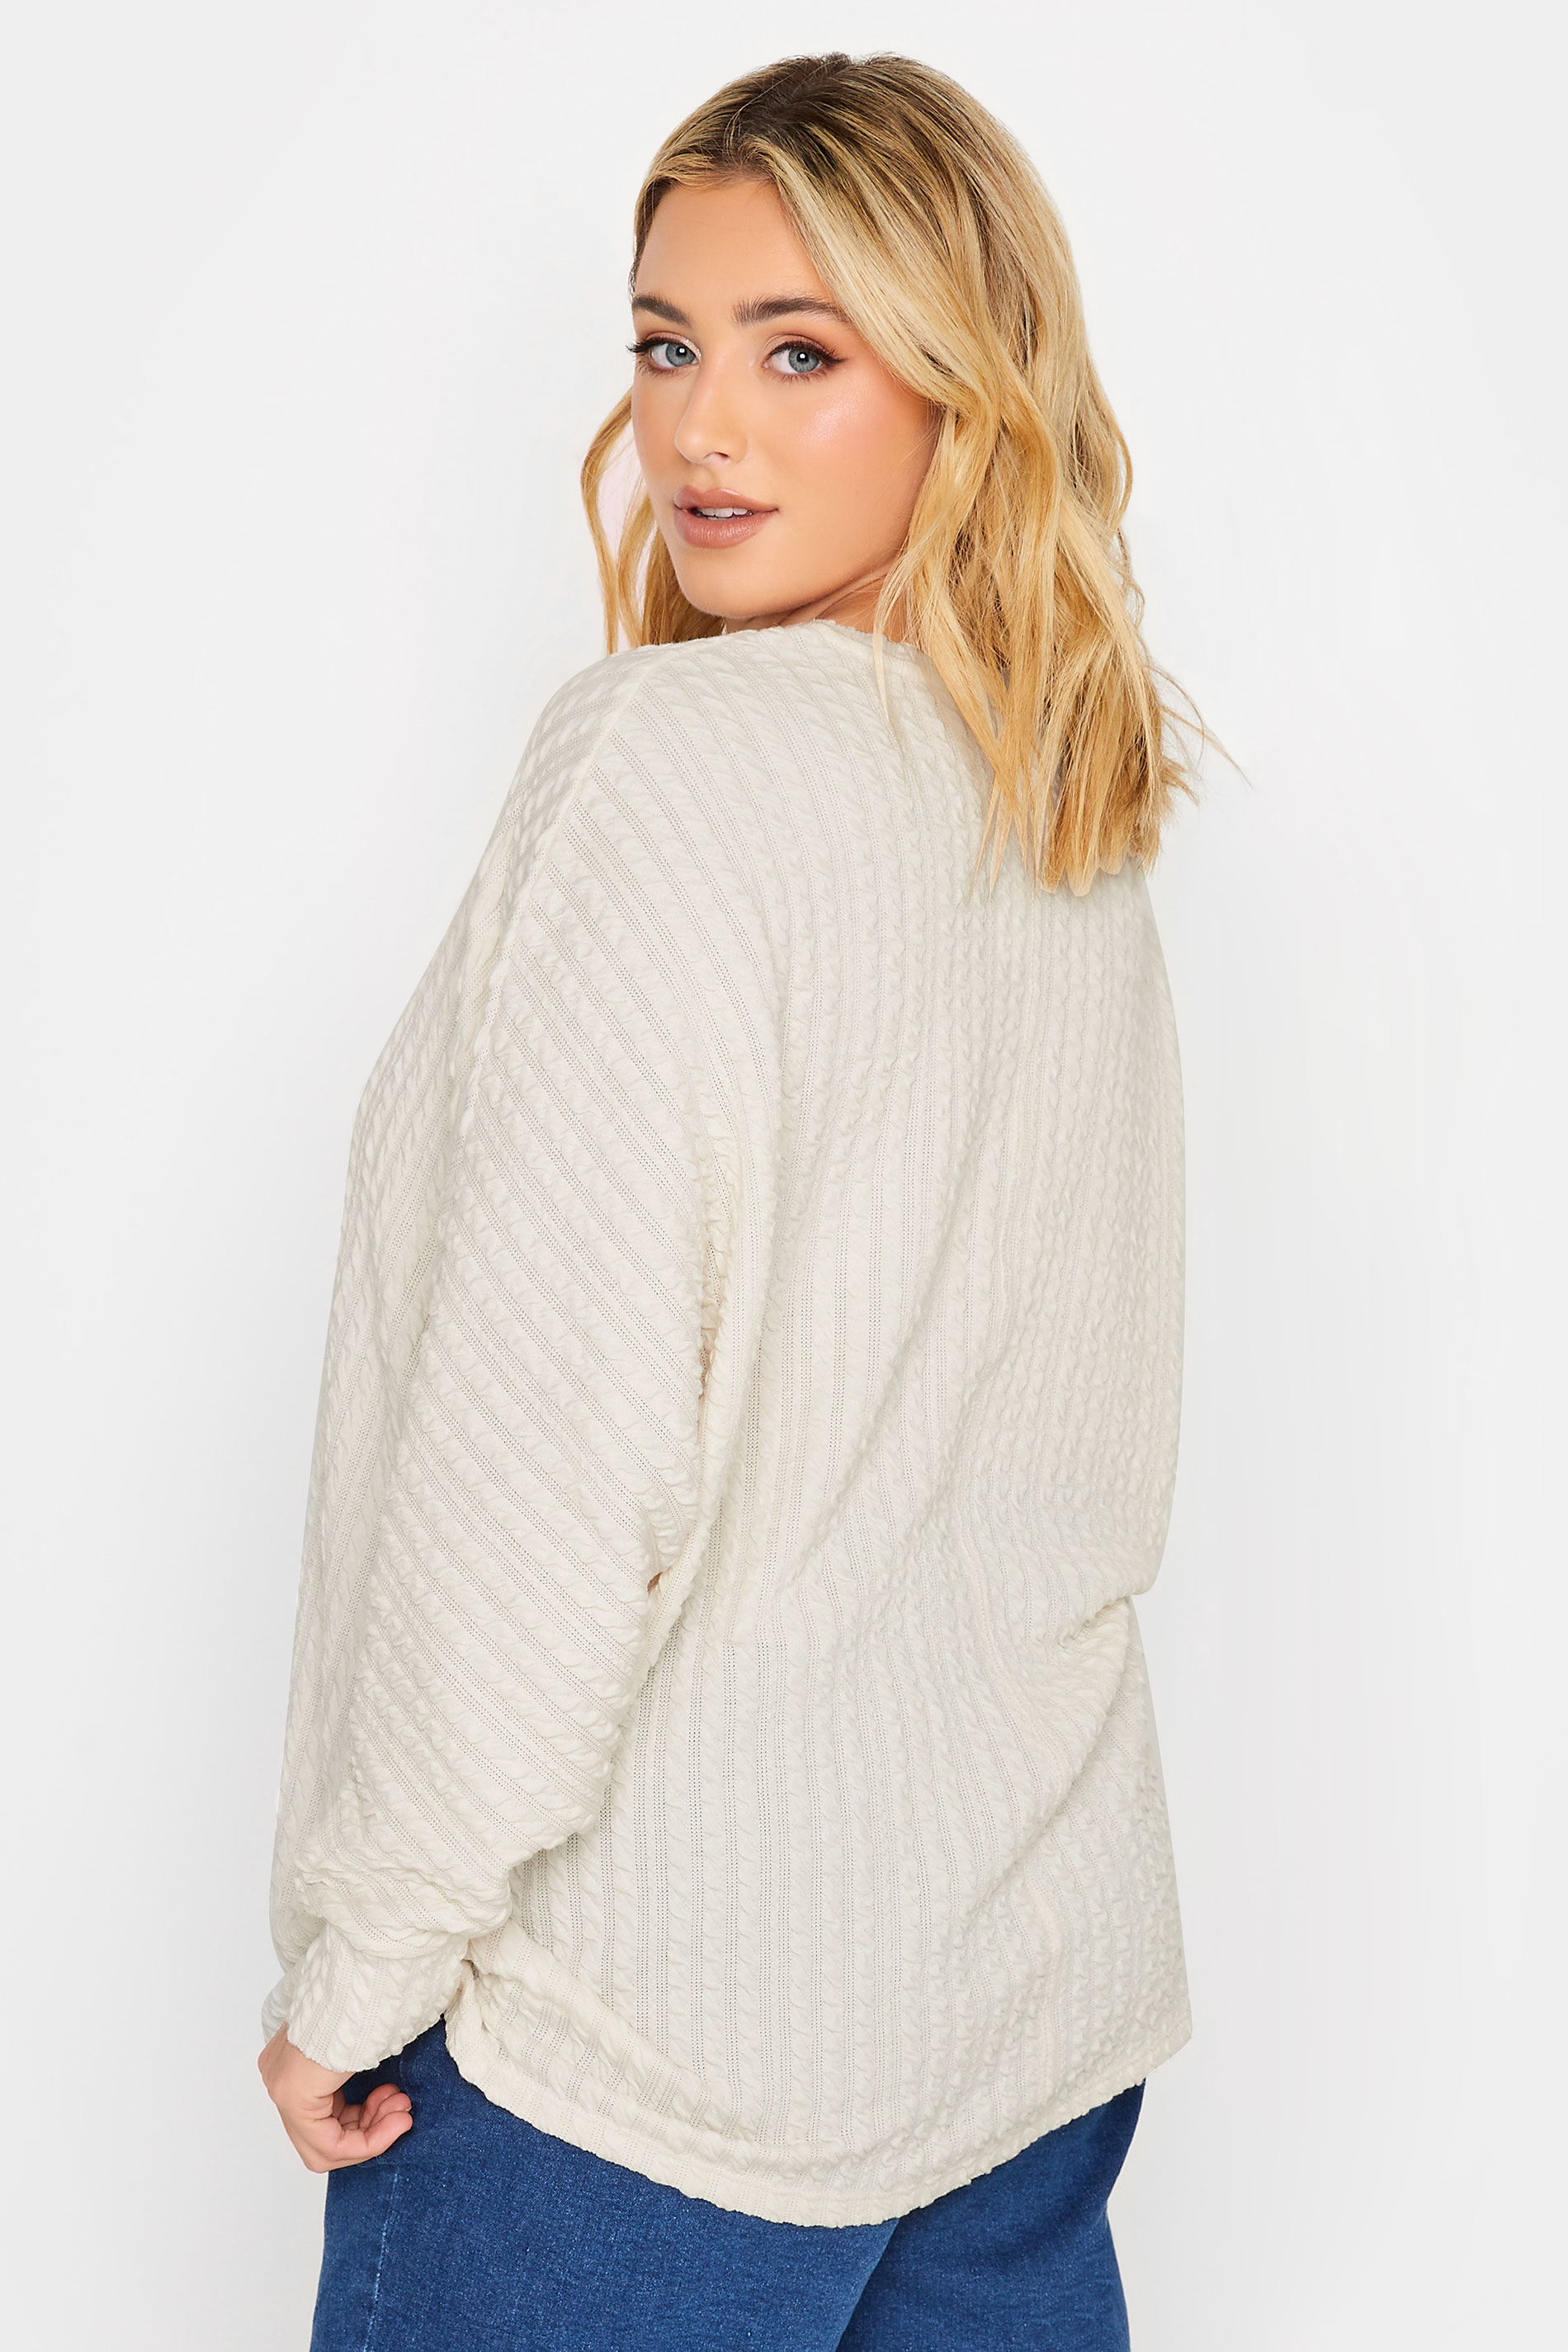 YOURS Plus Size White Textured Soft Touch Top | Yours Clothing 3